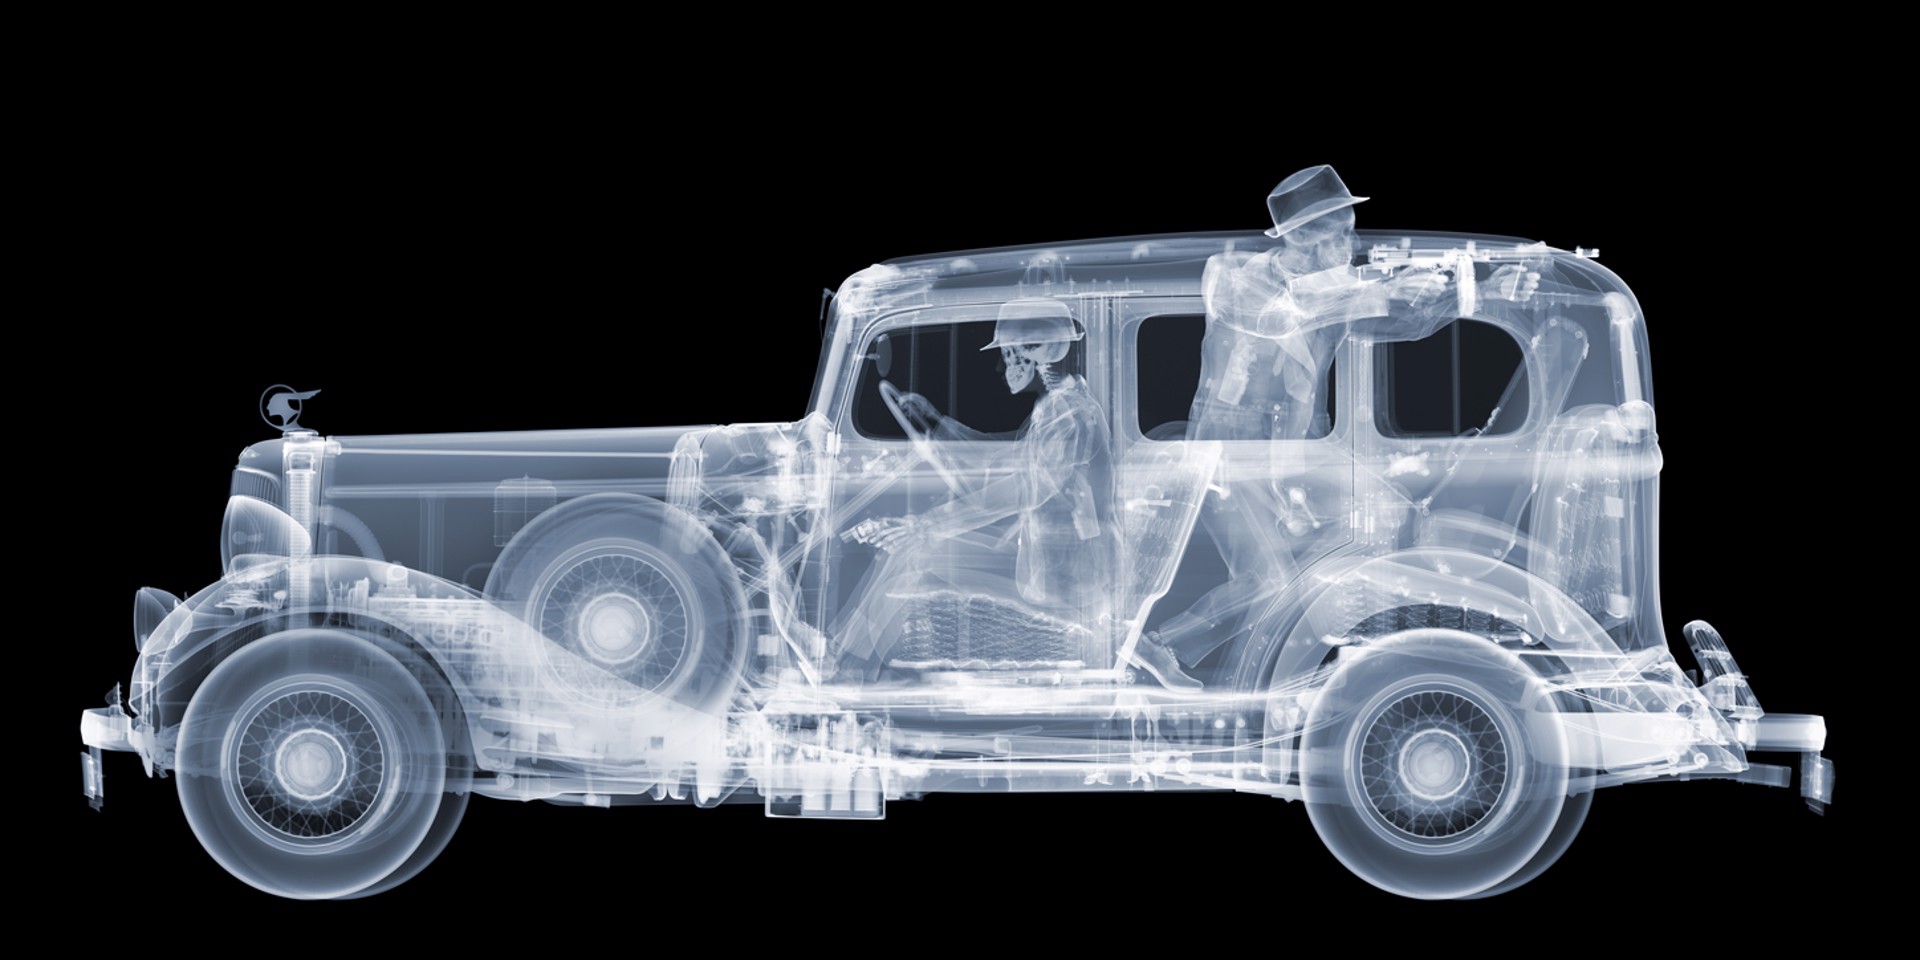 1930's Pontiac with Gangsters by Nick Veasey